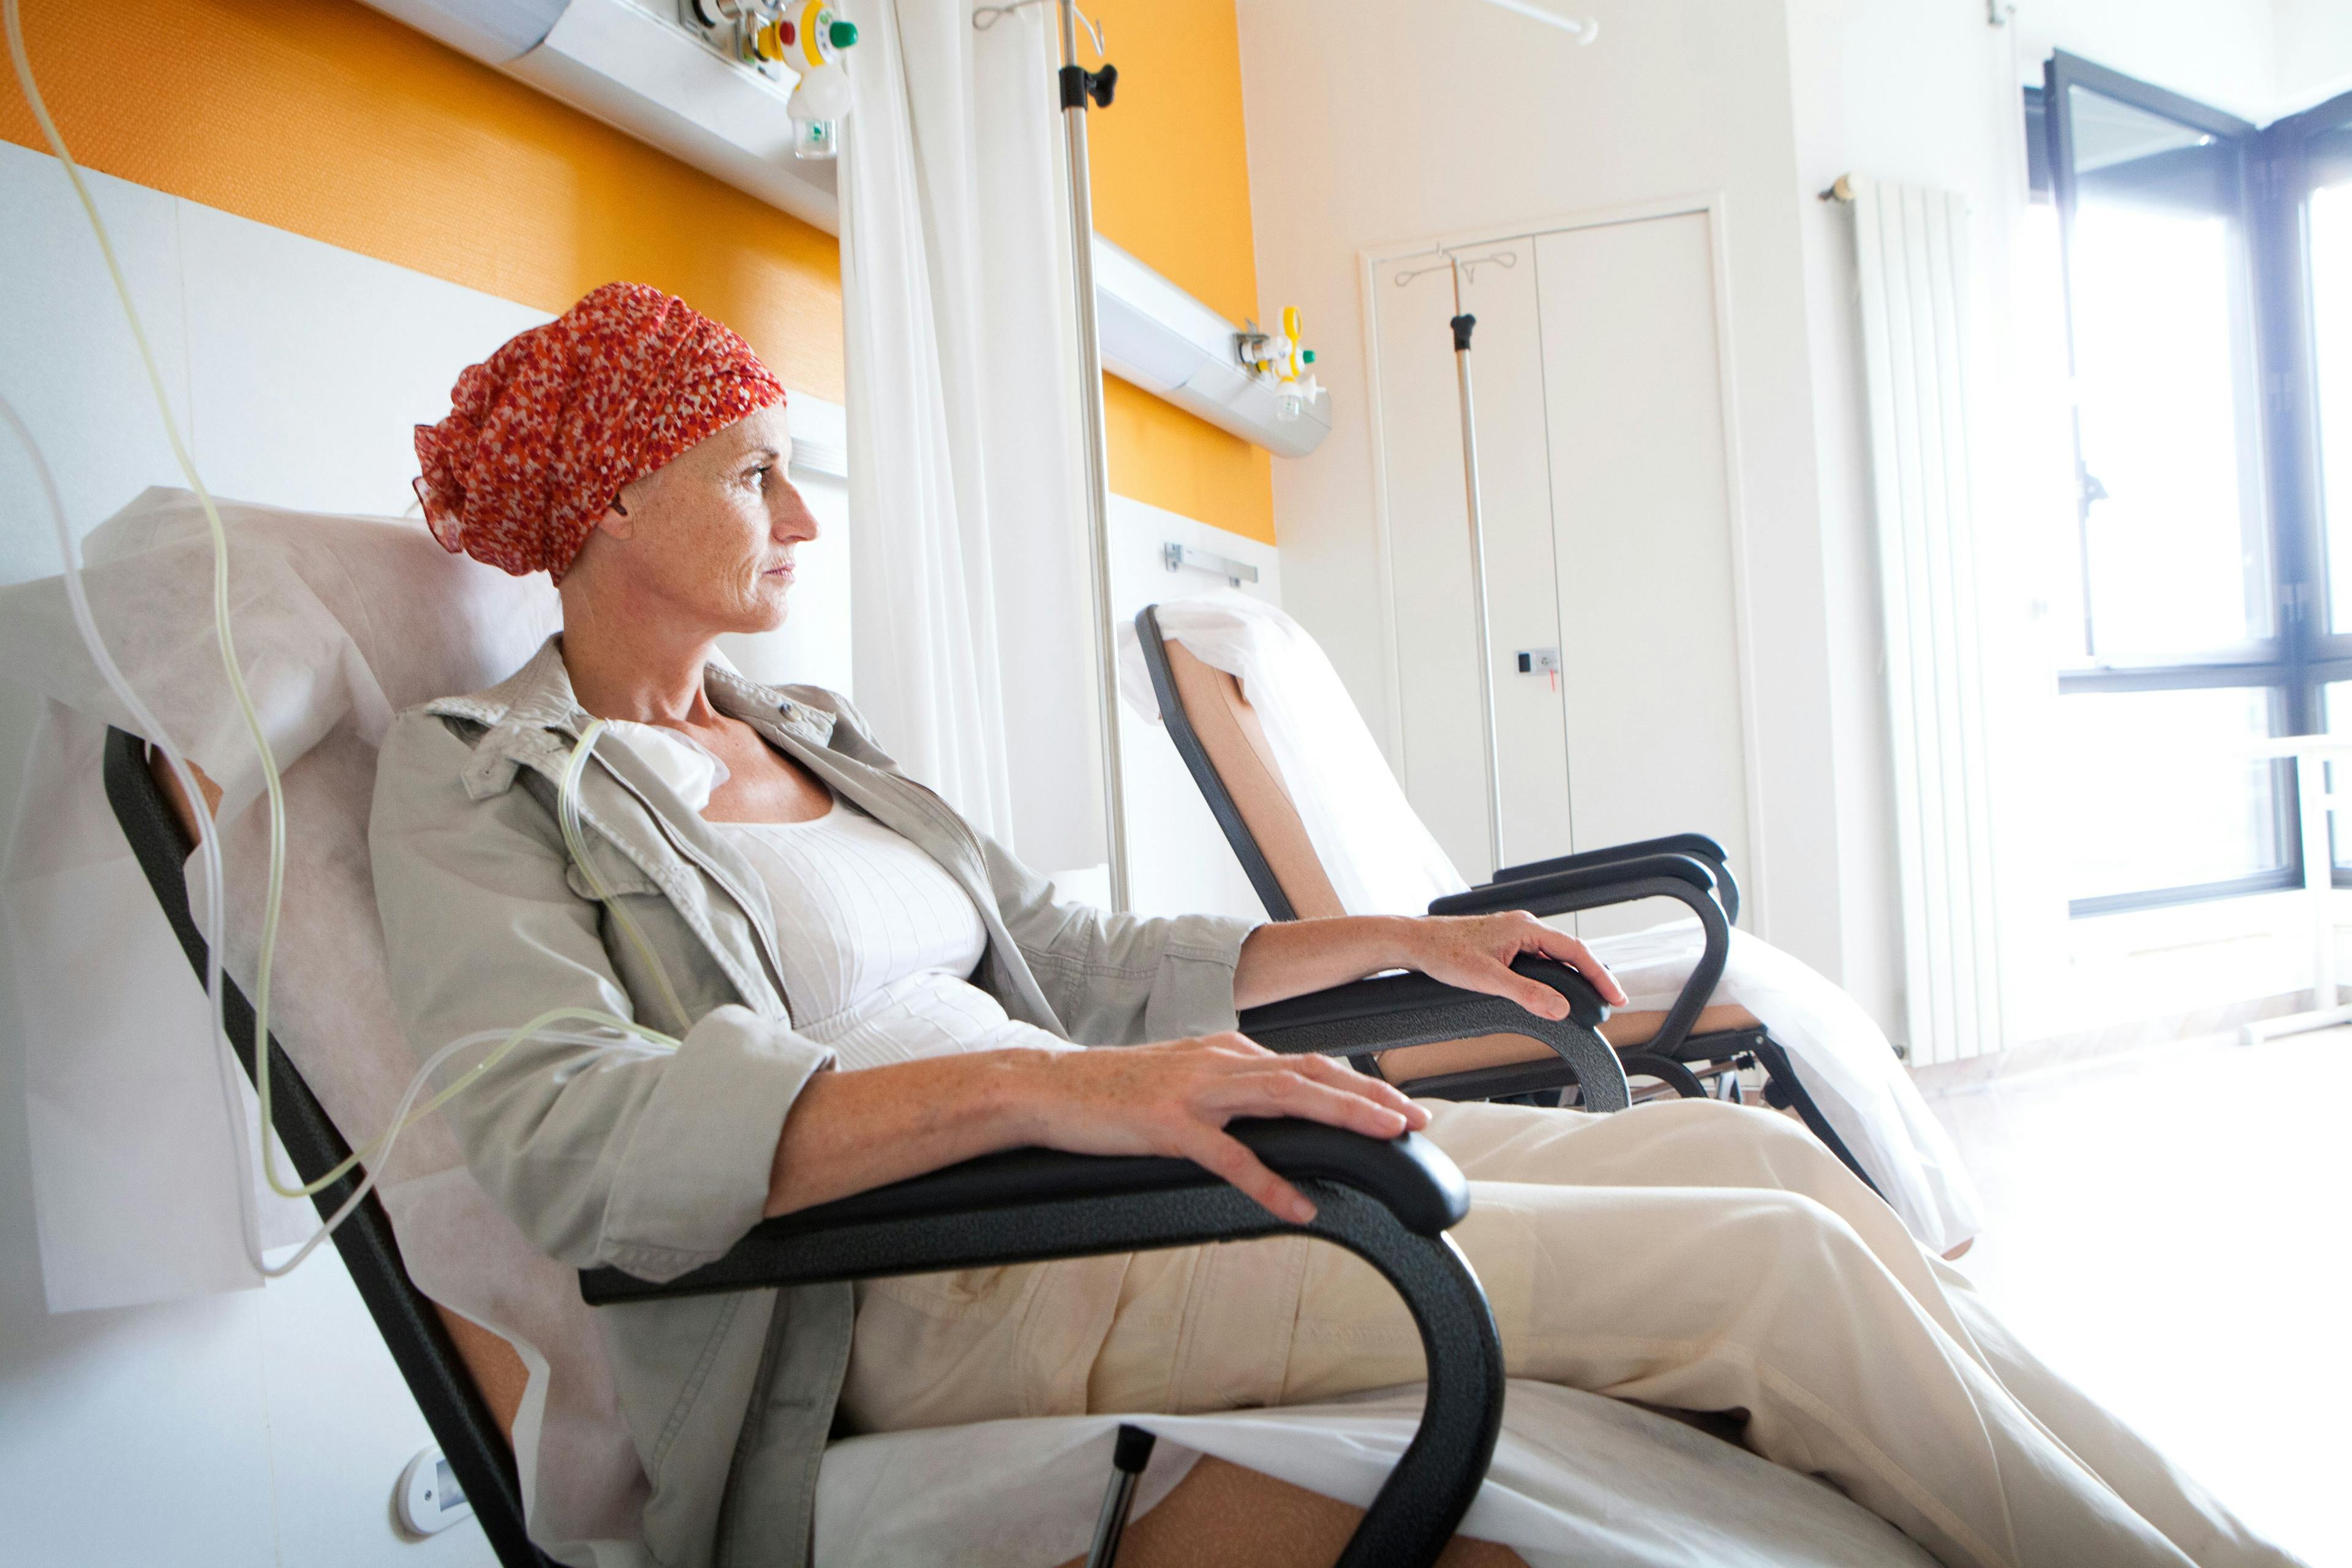 Patient with cancer receiving an infusion | Image credit: RFBSIP - stock.adobe.com